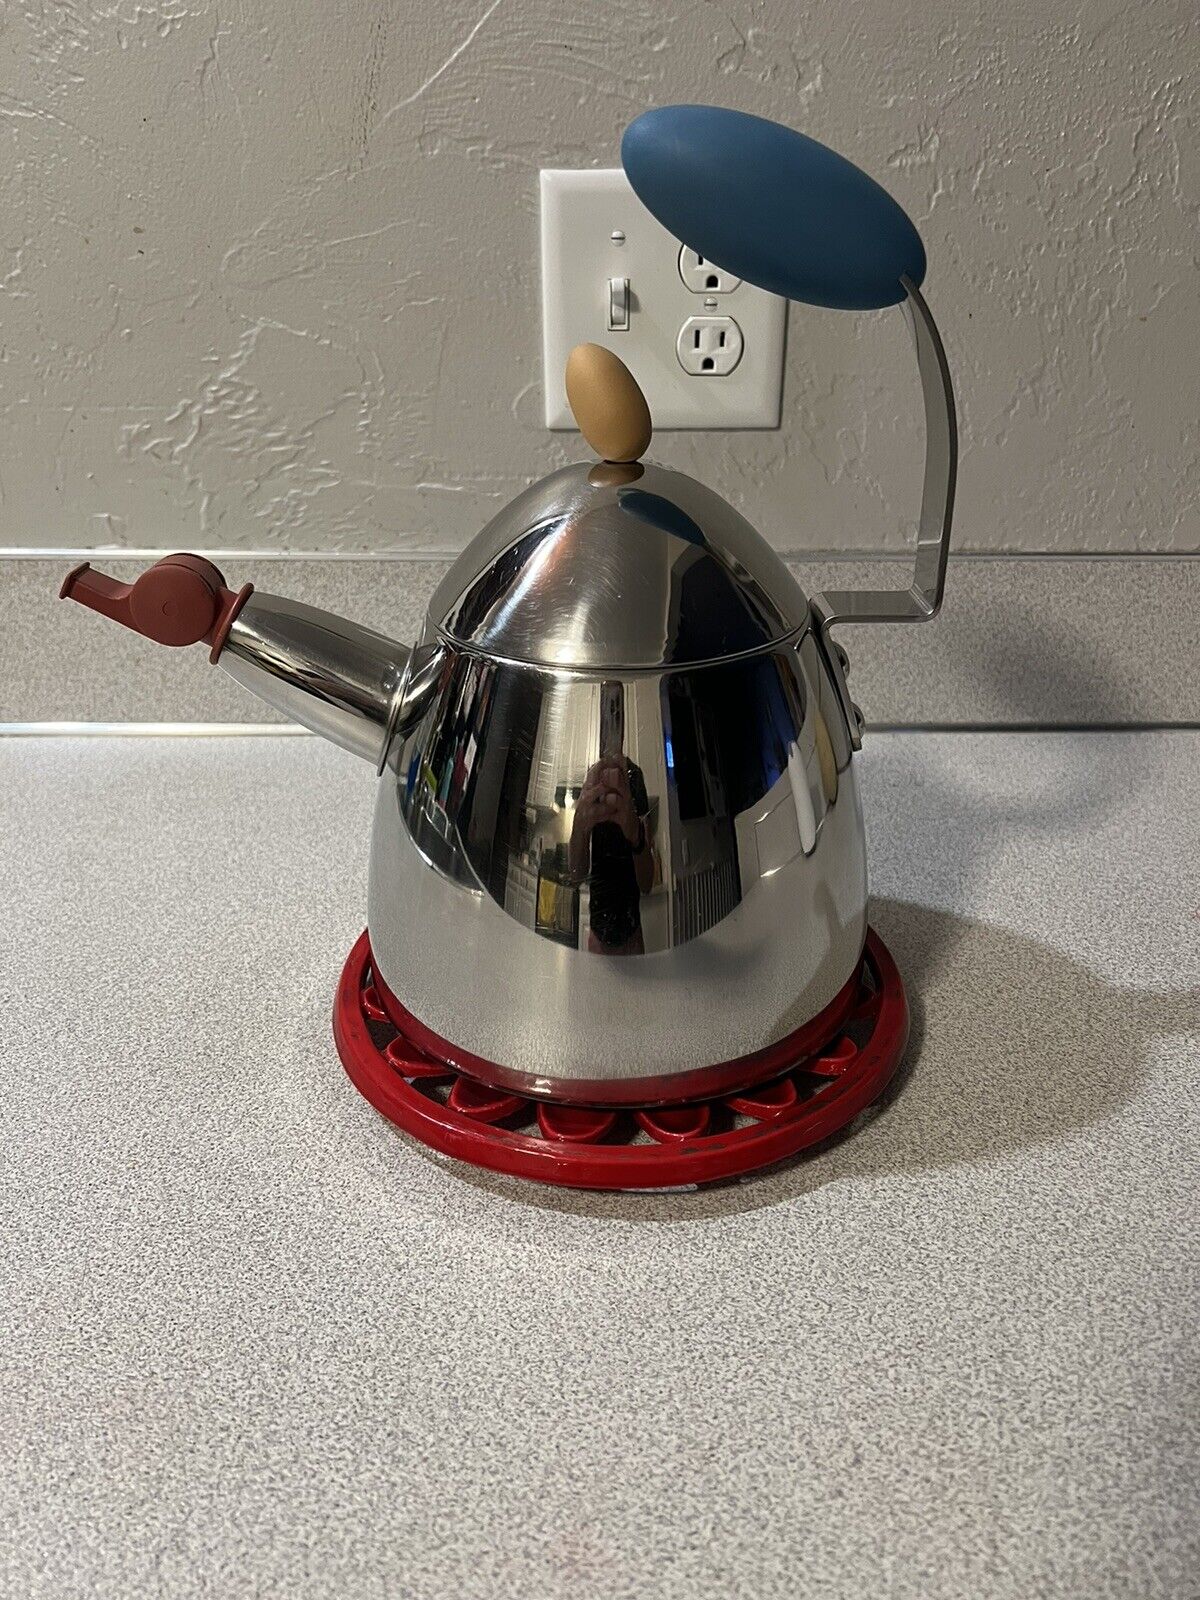 Vintage Michael Graves Stainless Steel Tea Kettle with Whistle Spout Teapot